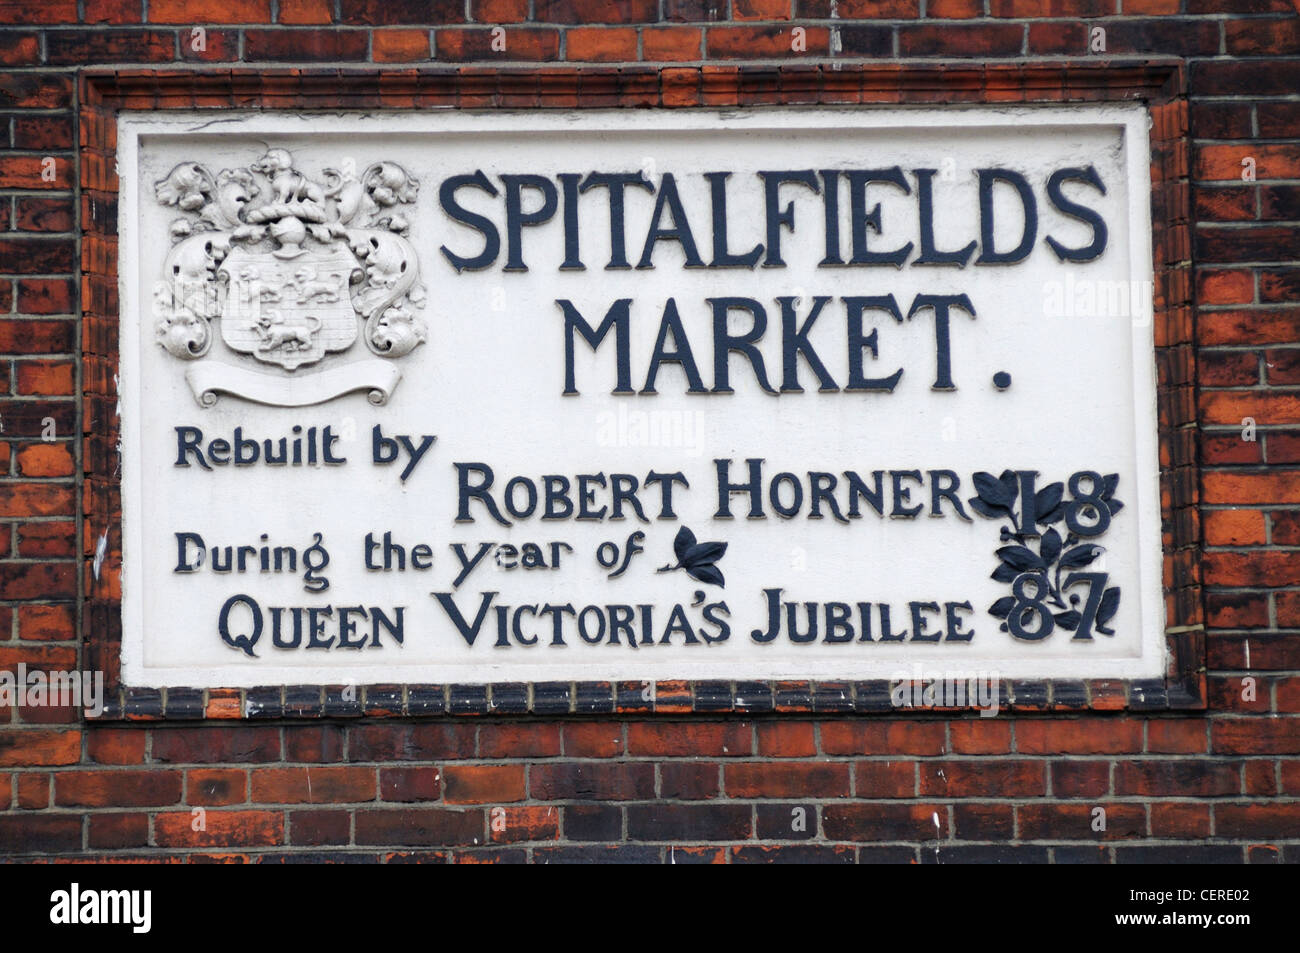 Spitalfields Market Plaque commemorating the rebuilding of the market by Robert Horner in 1887, the year of Queen Victoria's Jub Stock Photo